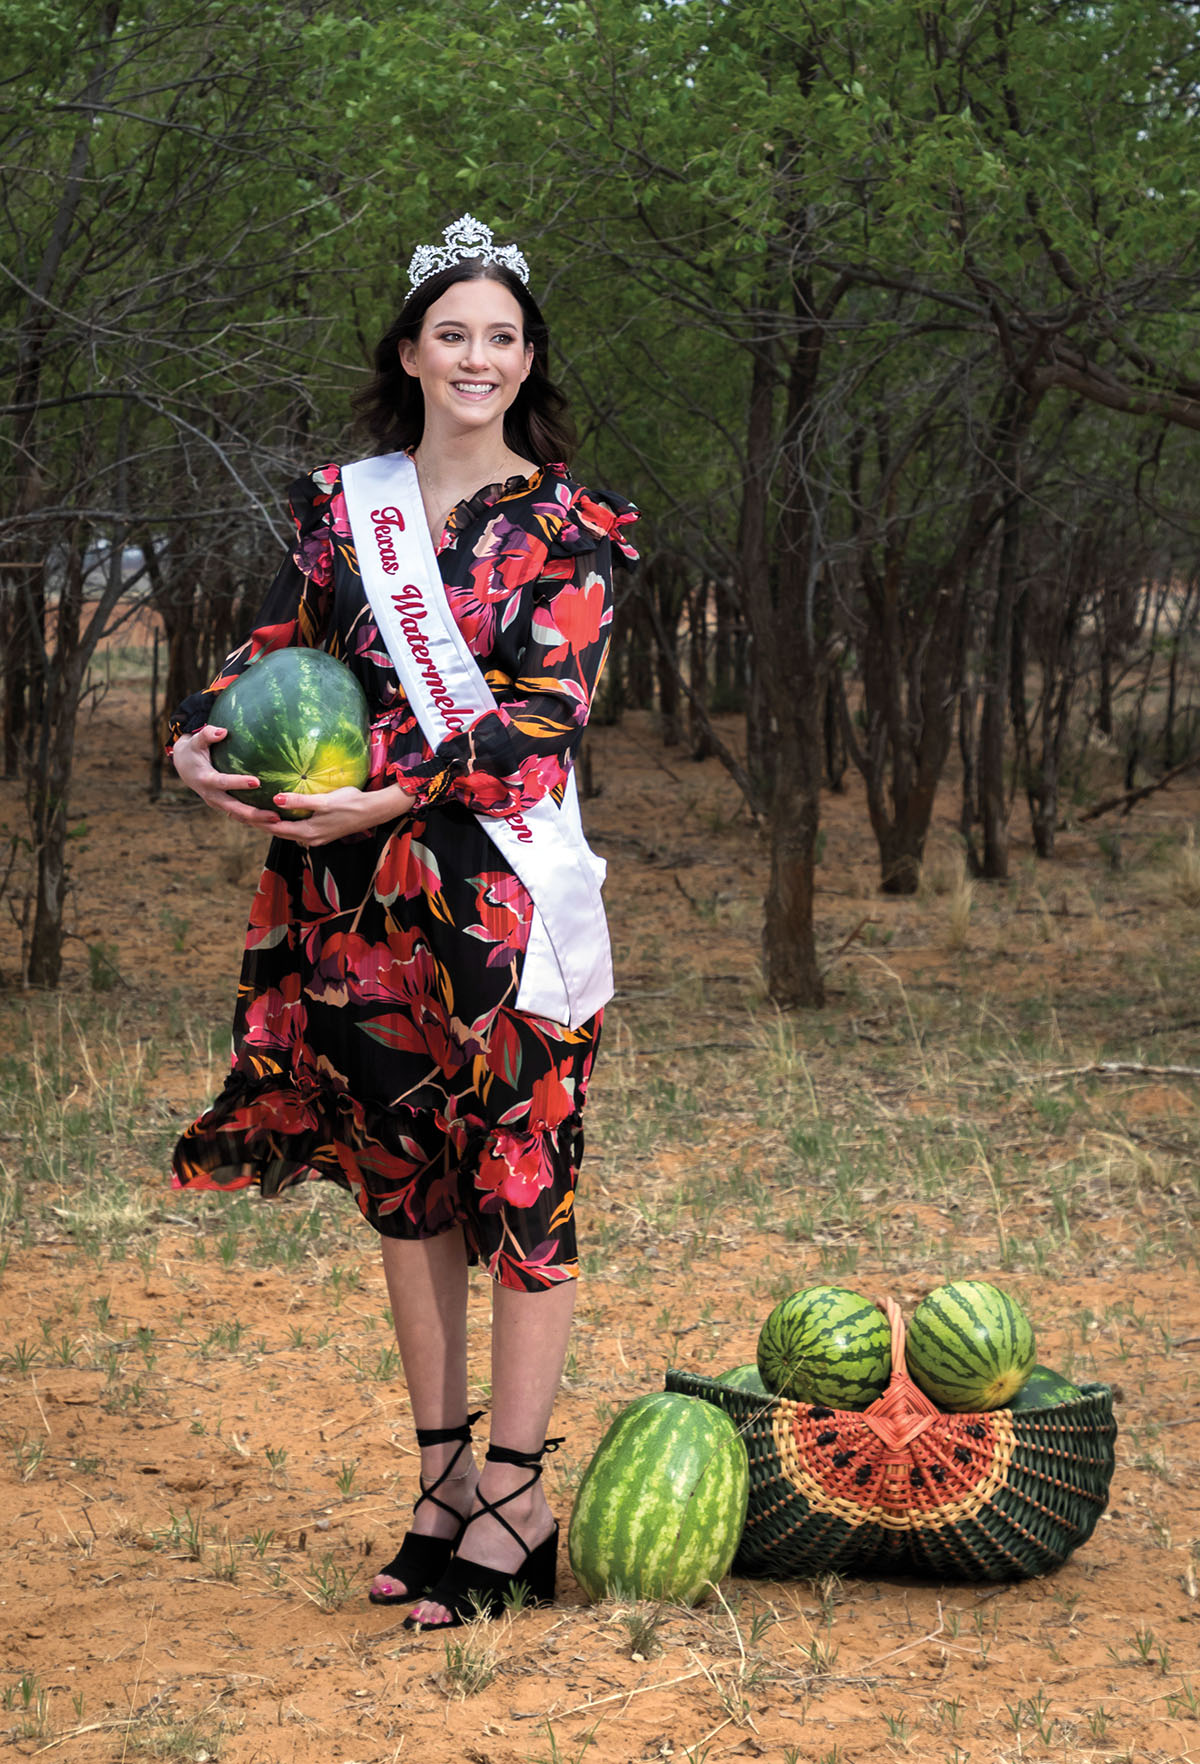 A woman in a flowered dress and sash holds a watermelon standing next to a basket of watermelons